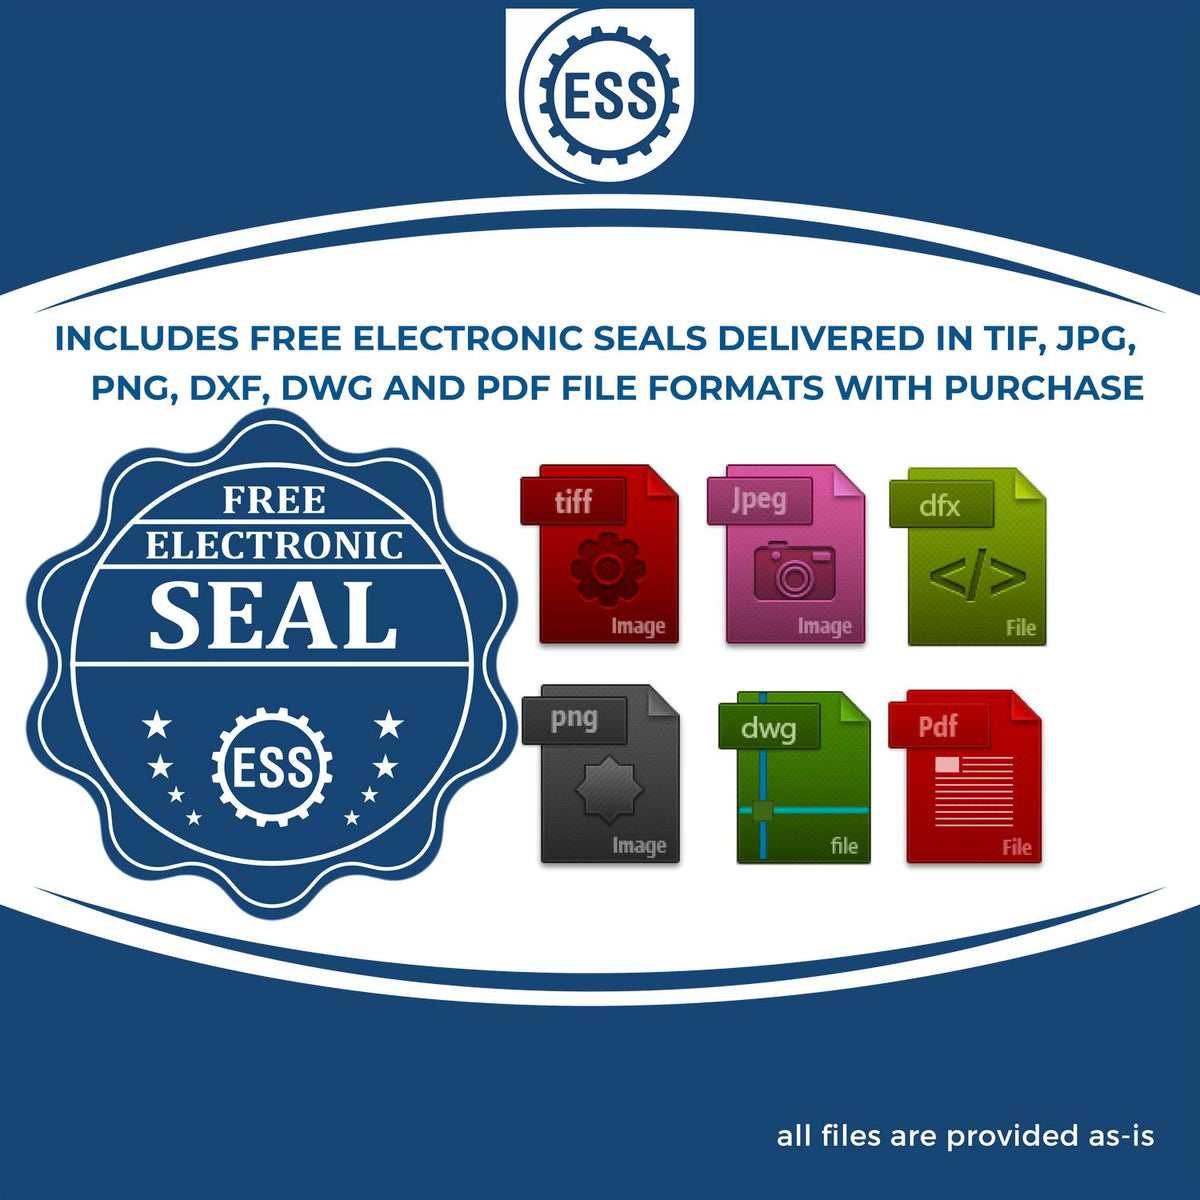 An infographic for the free electronic seal for the MaxLight Premium Pre-Inked California State Seal Notarial Stamp illustrating the different file type icons such as DXF, DWG, TIF, JPG and PNG.